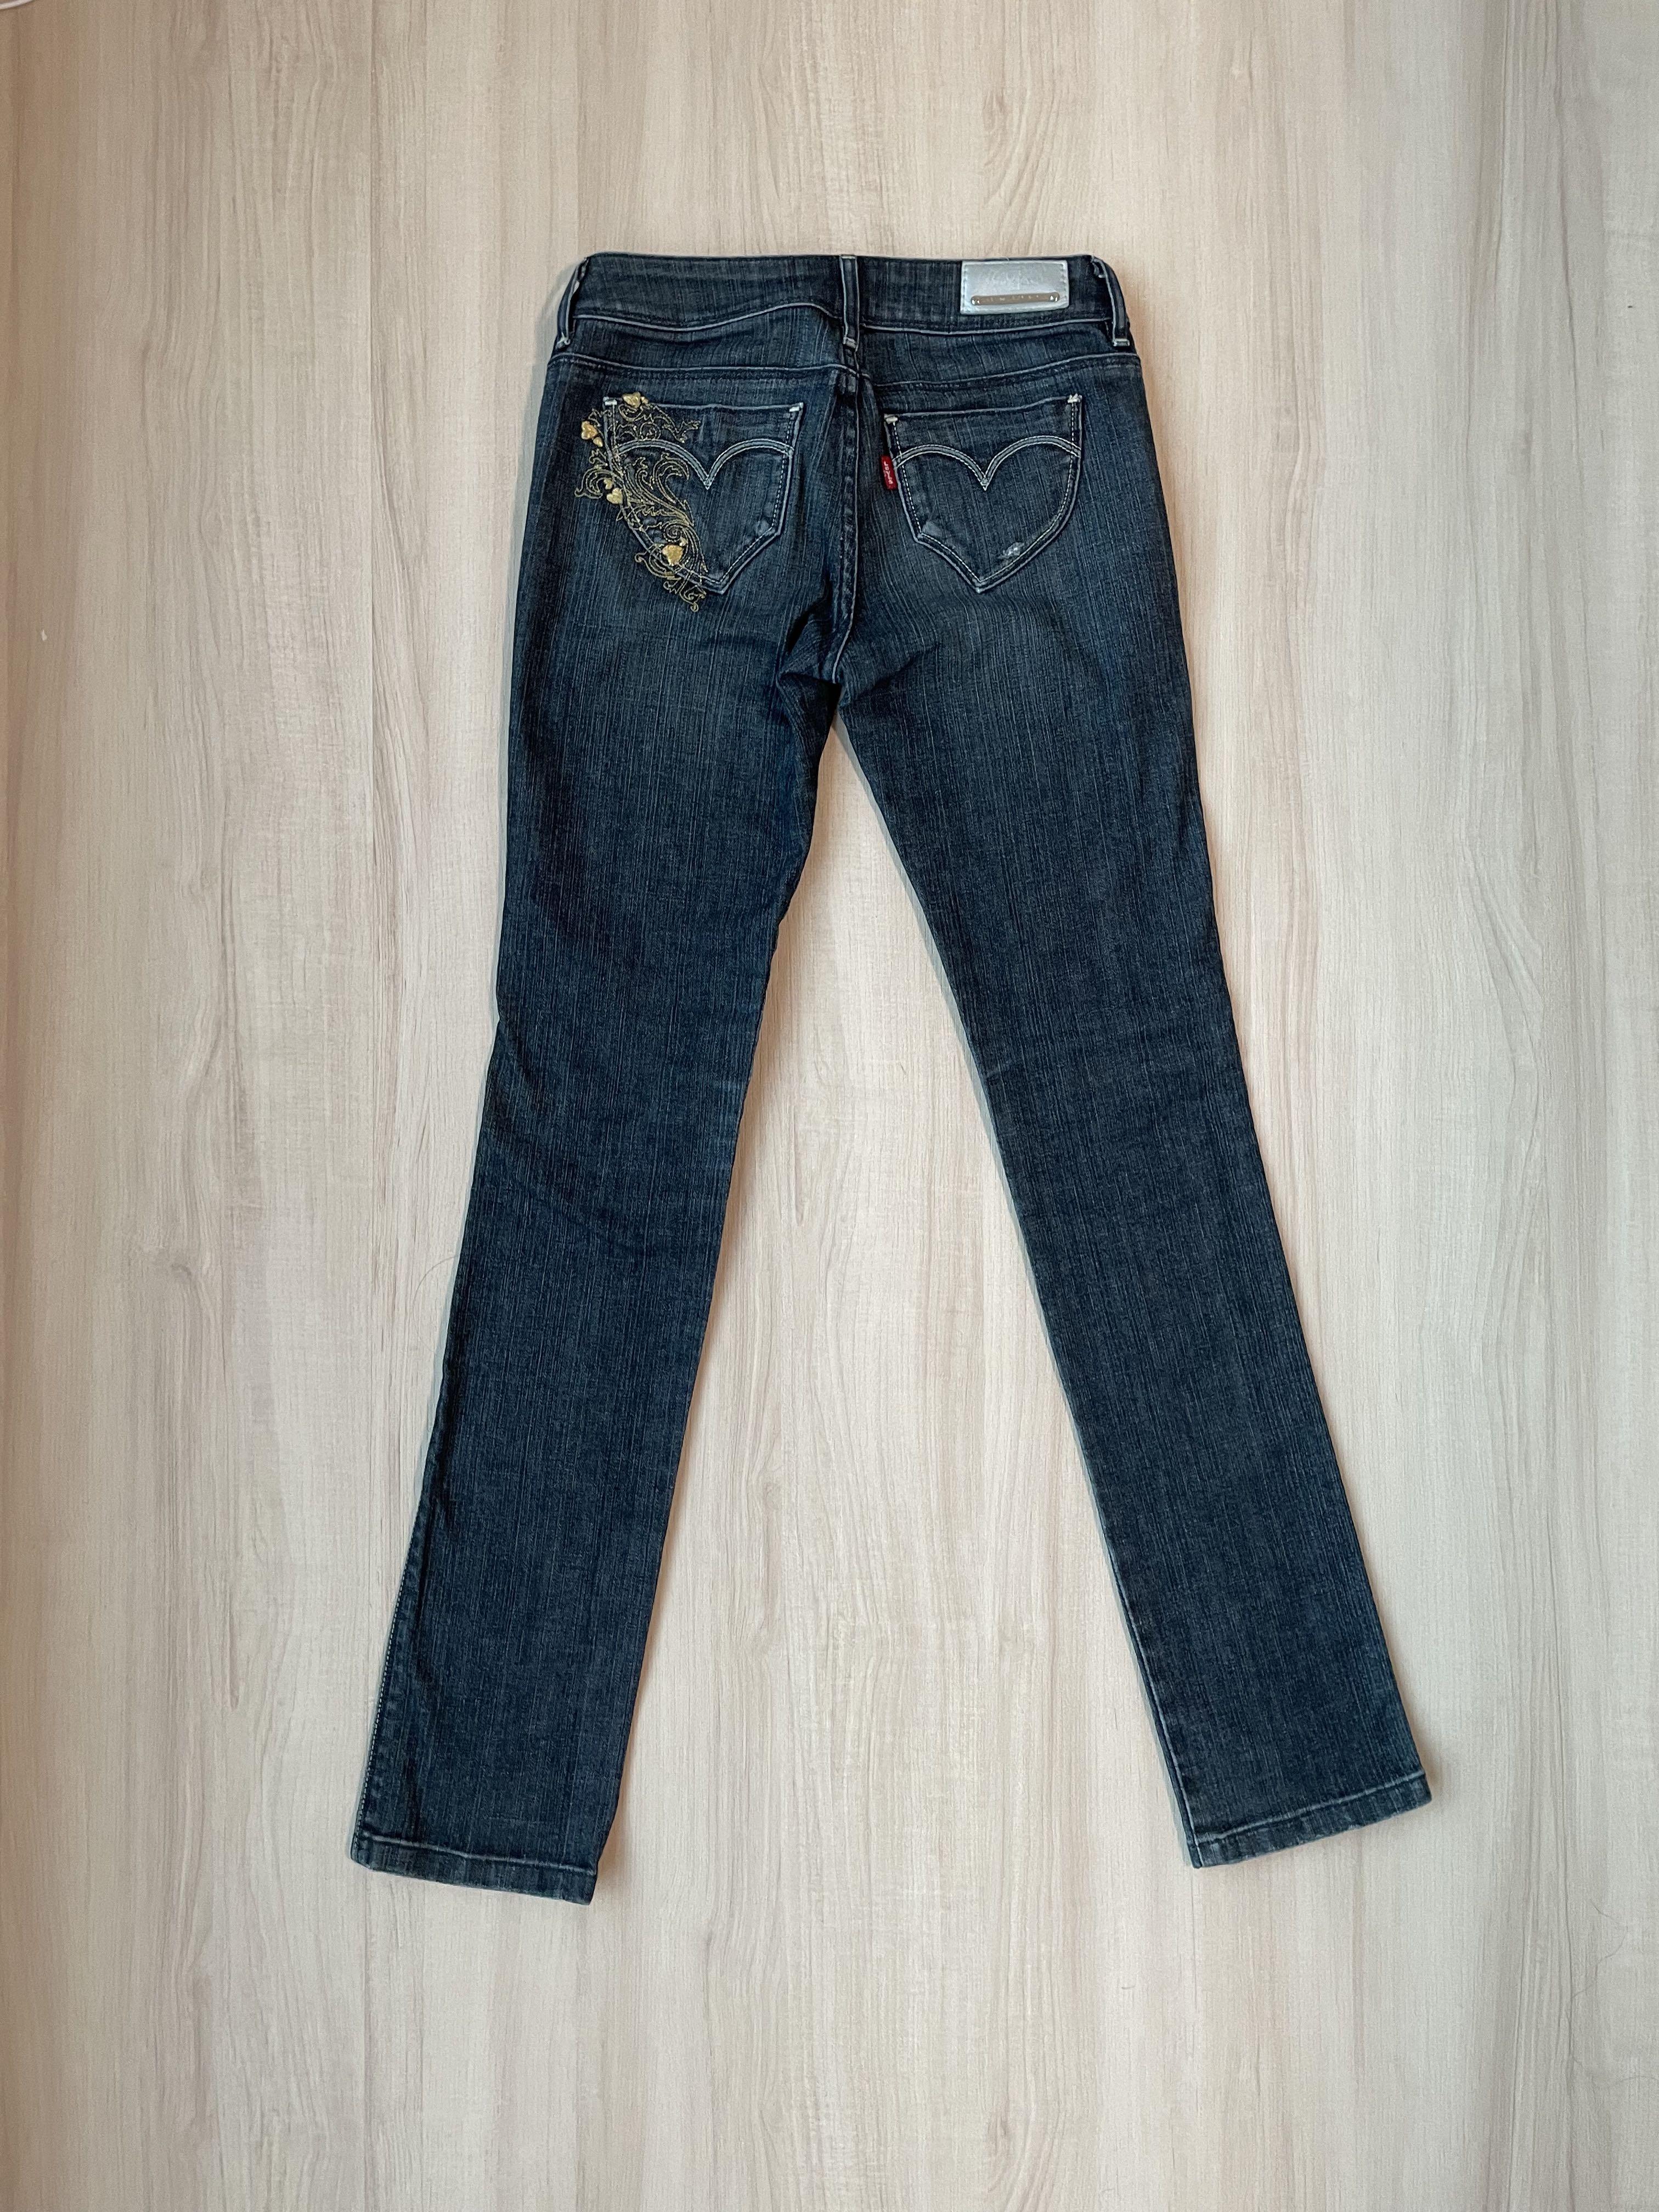 Vintage Levi's lady style jeans, Women's Fashion, Bottoms, Jeans & Leggings  on Carousell